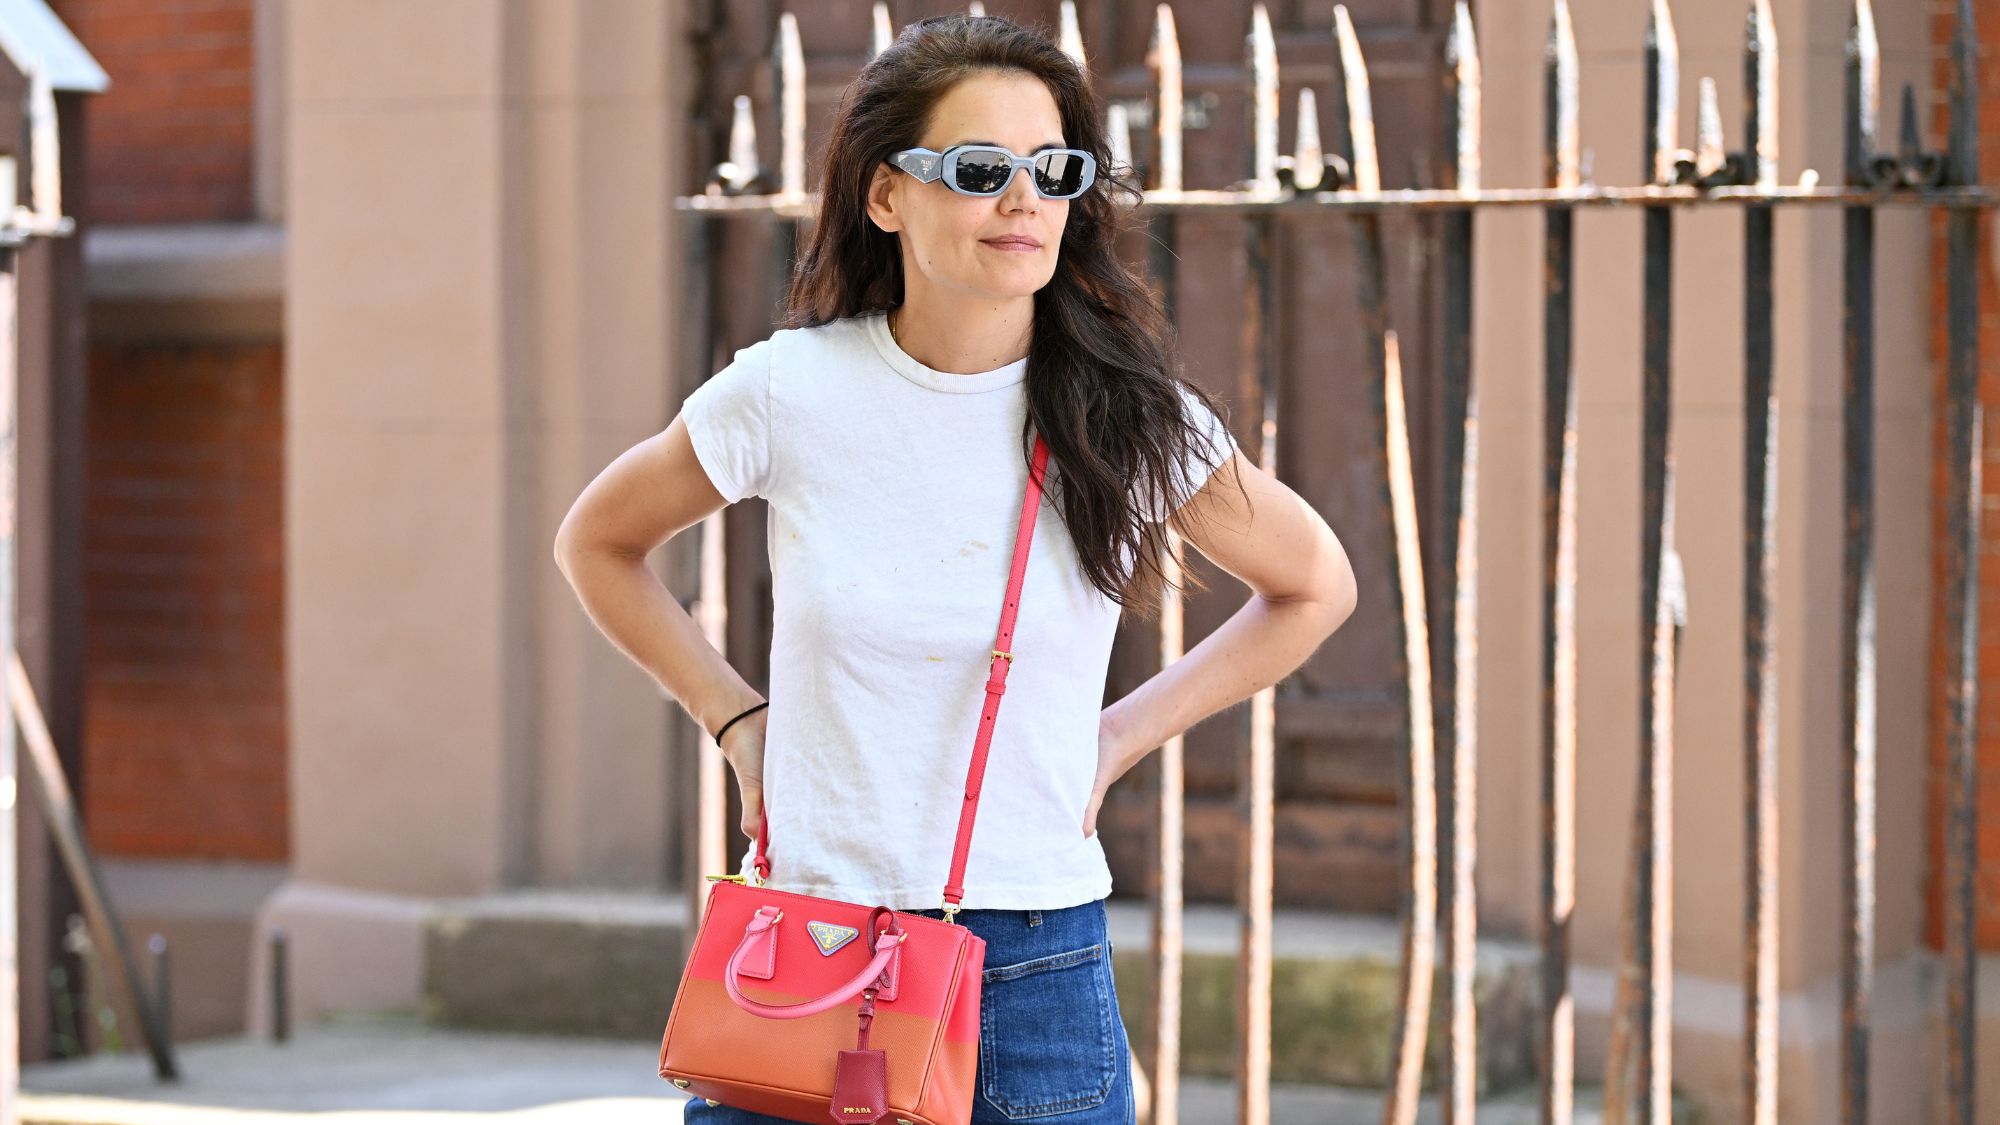 Katie Holmes out in New York City carrying a Prada Galleria